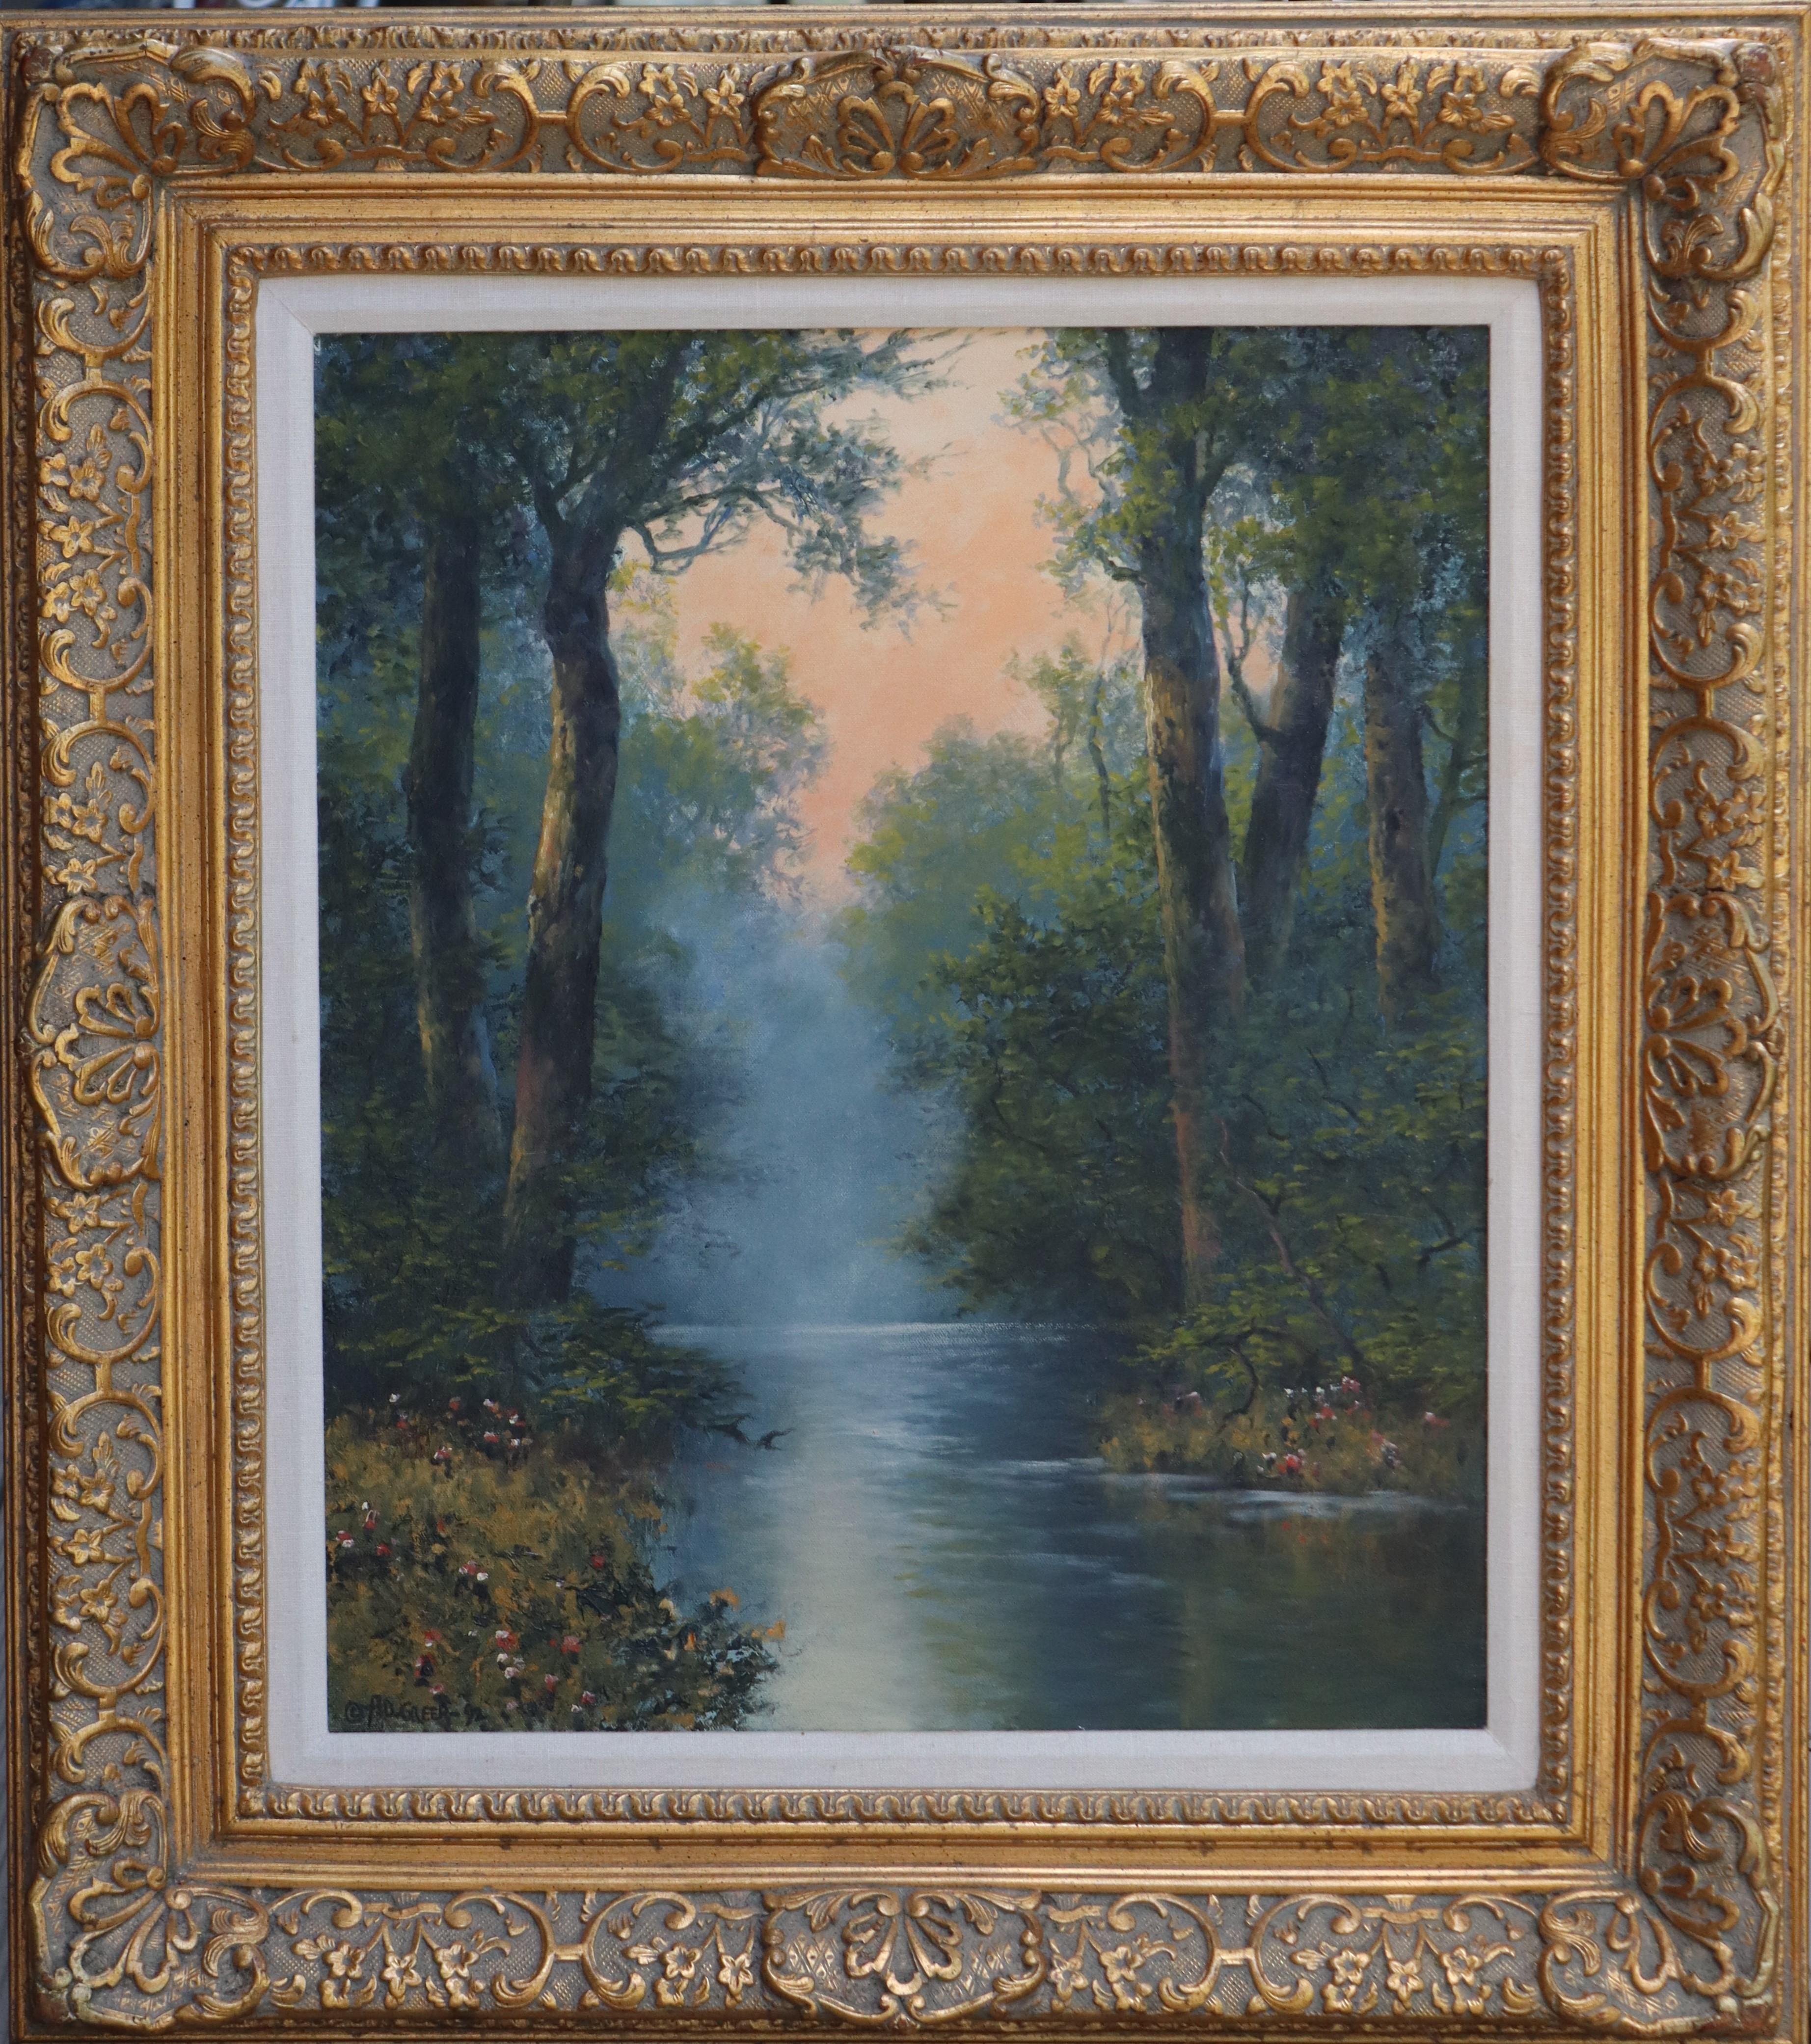 Woodland Pond at Sunset - Painting by A.D. Greer